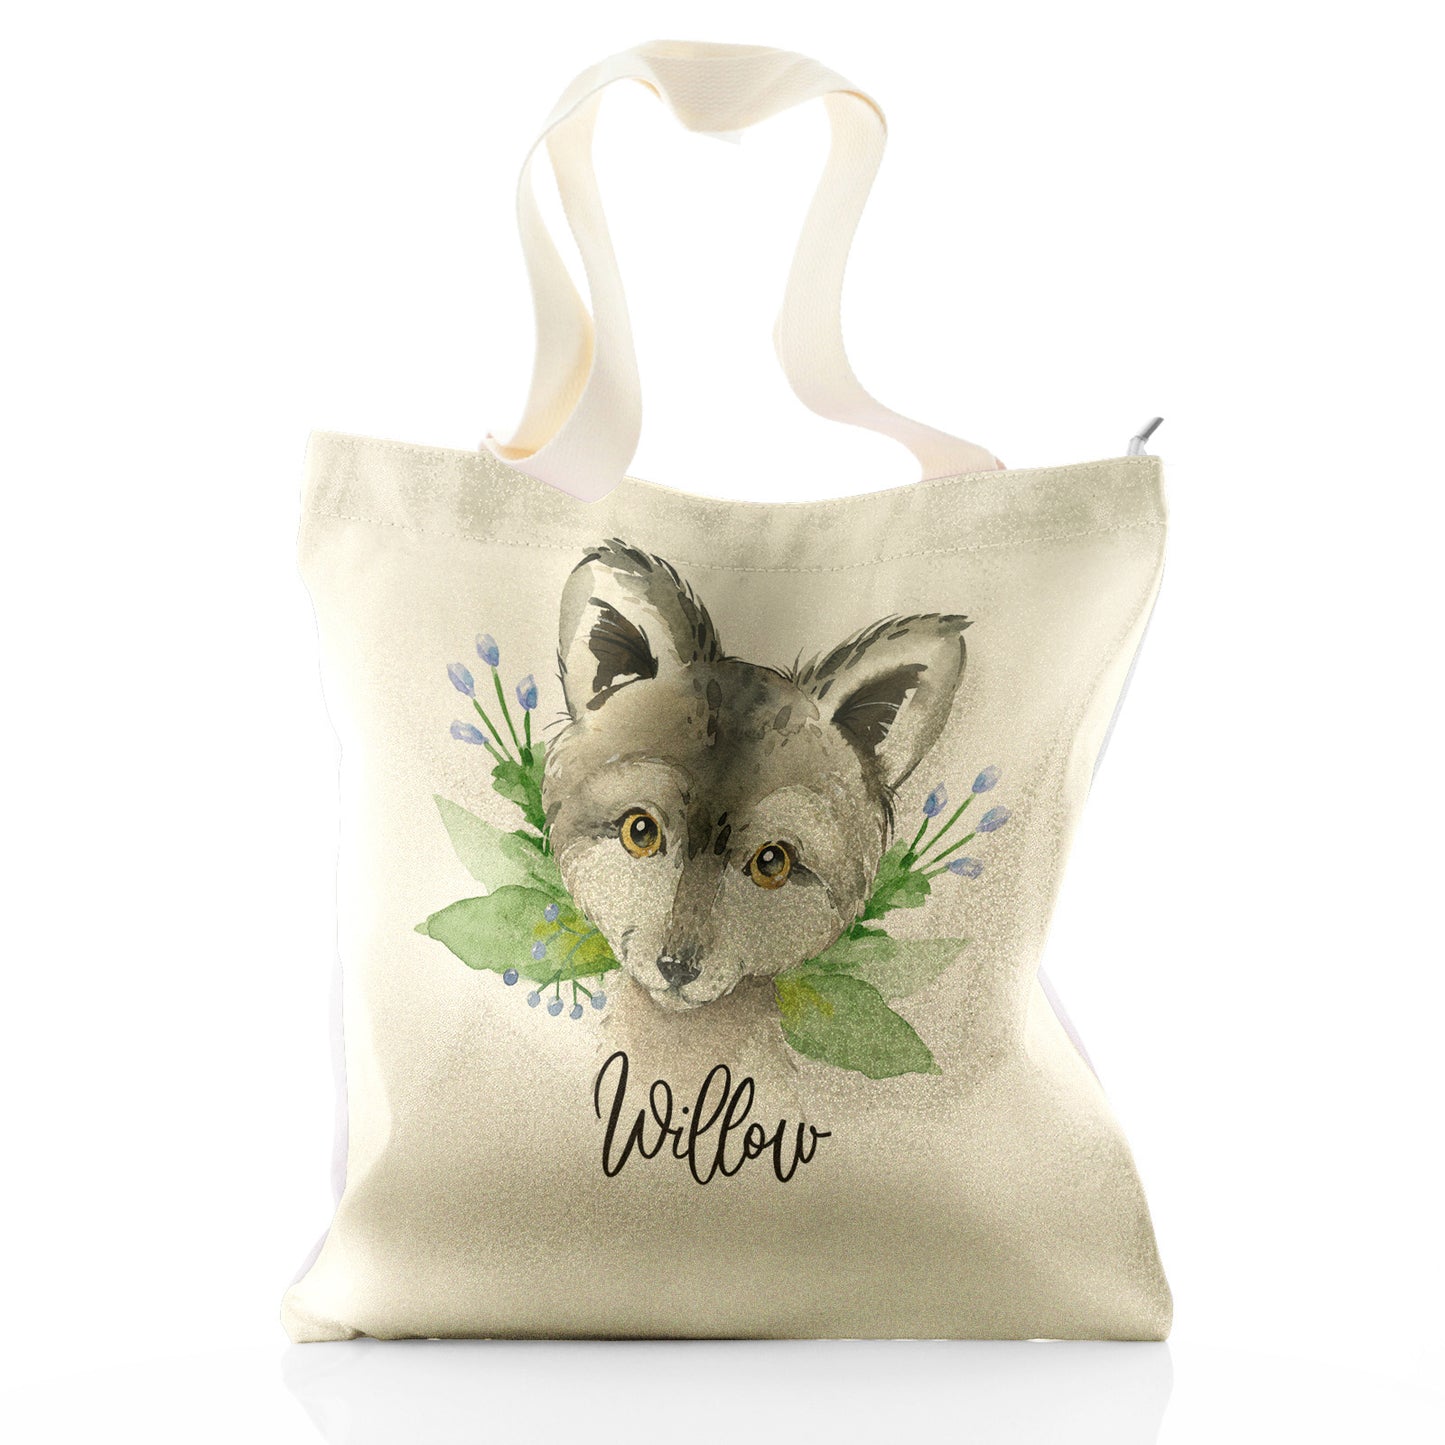 Personalised Glitter Tote Bag with Grey Wolf Blue Flowers and Cute Text